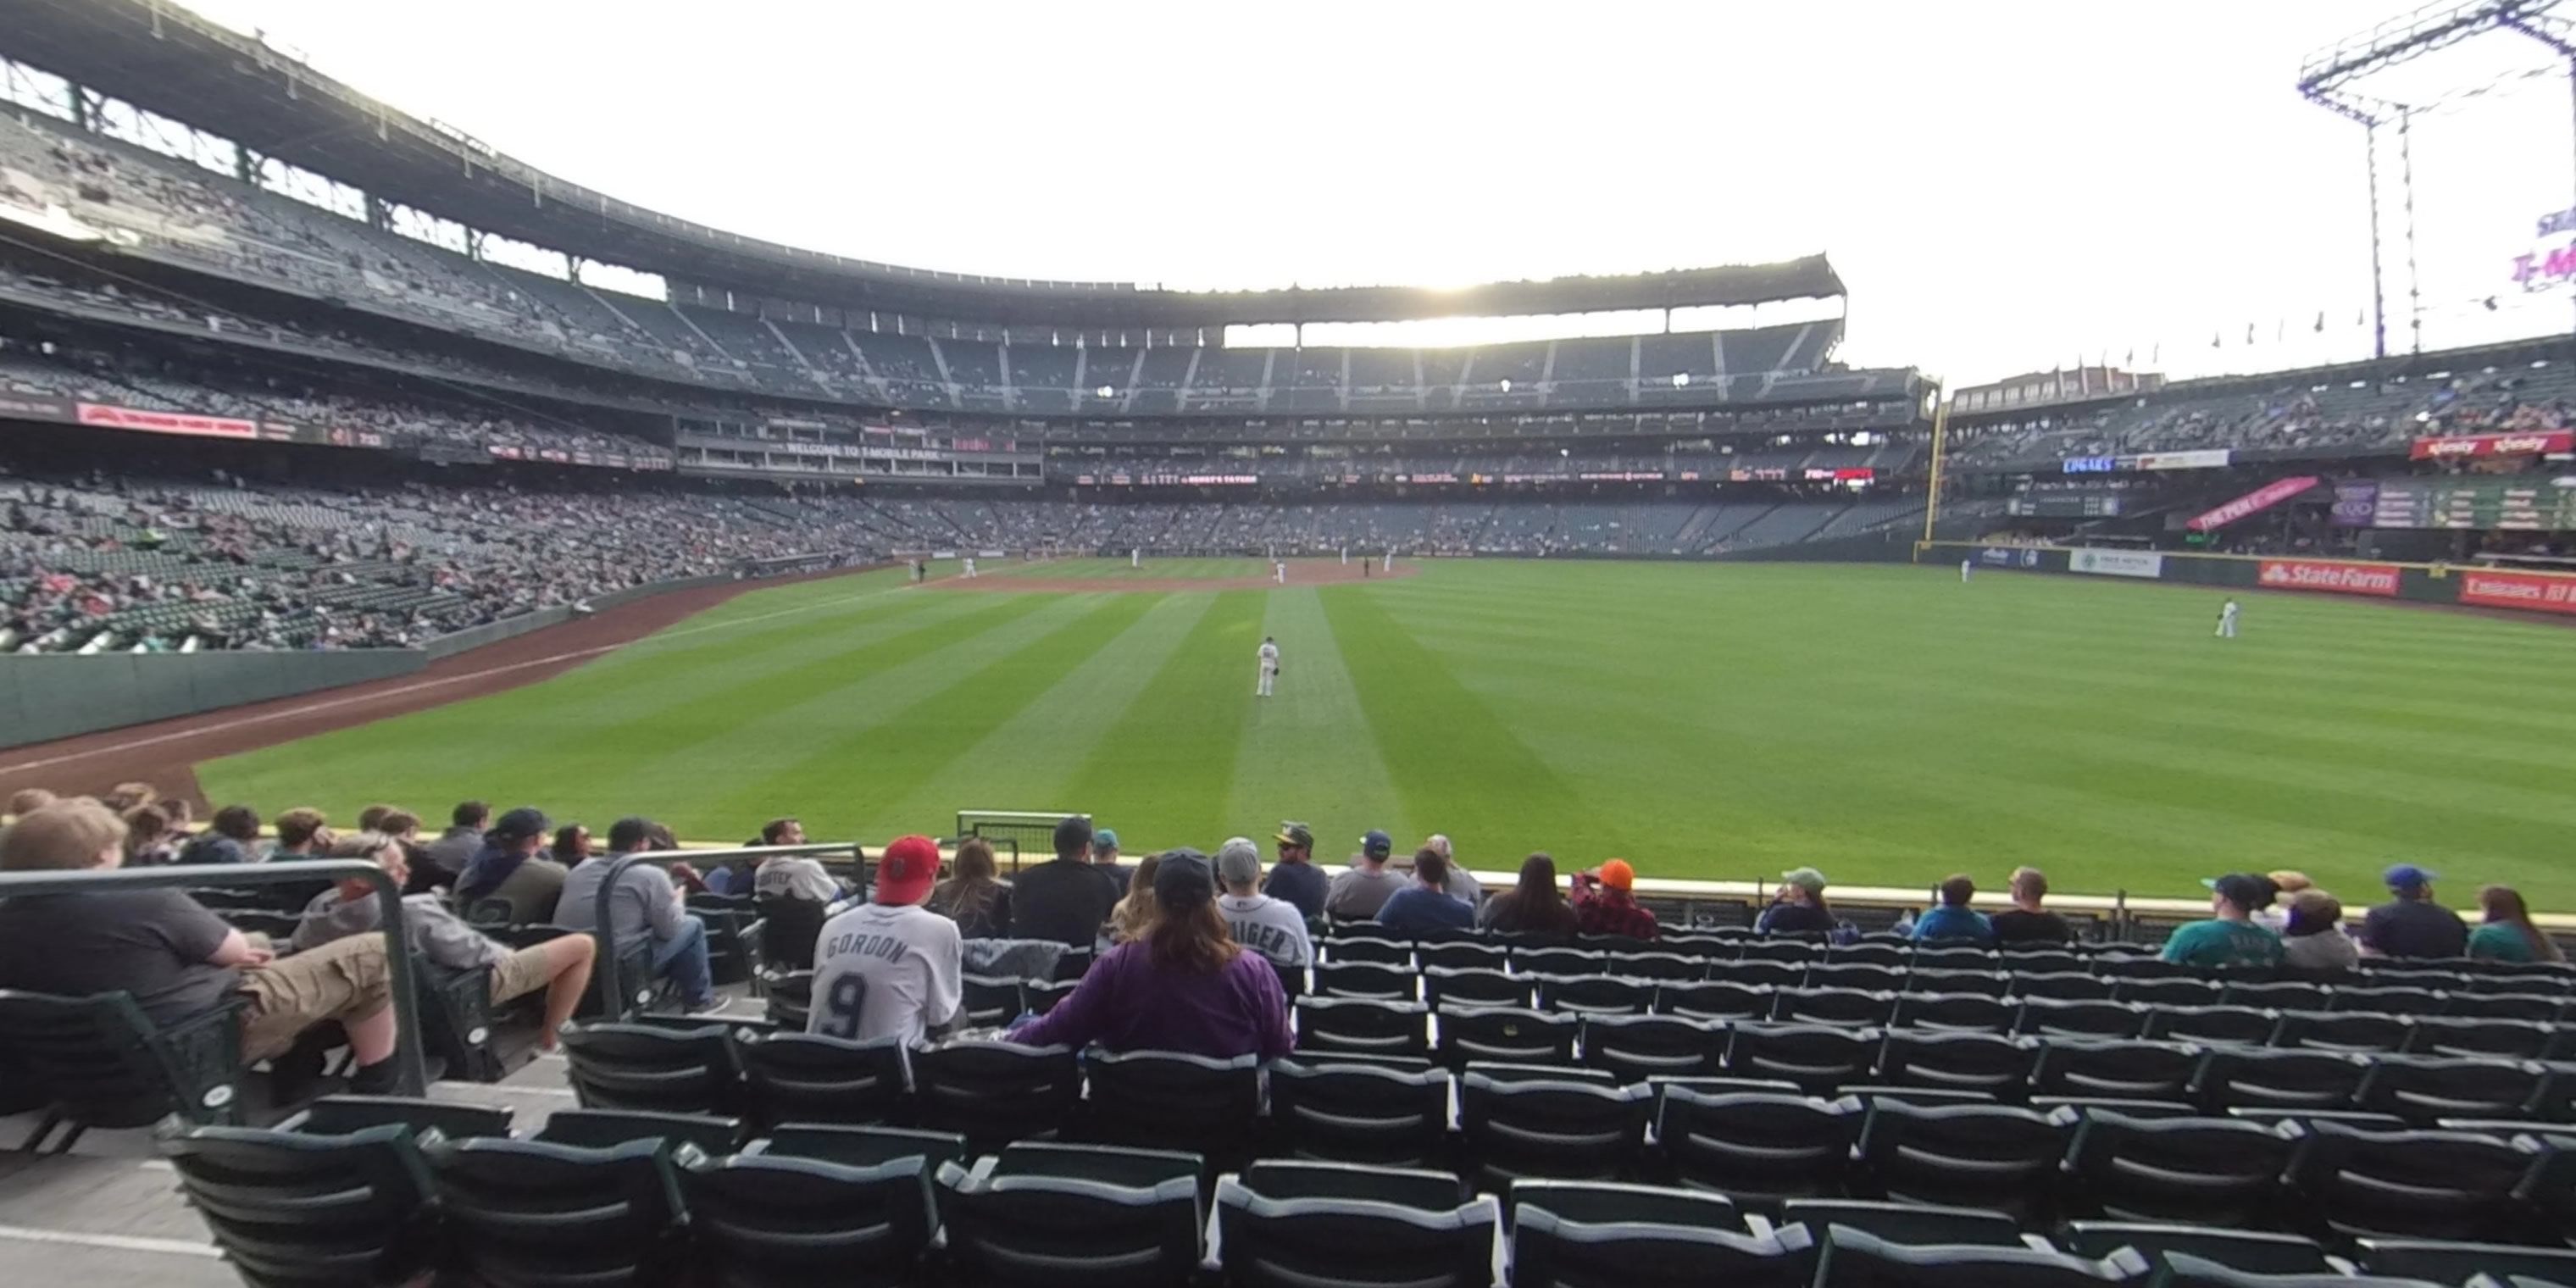 section 107 panoramic seat view  for baseball - t-mobile park